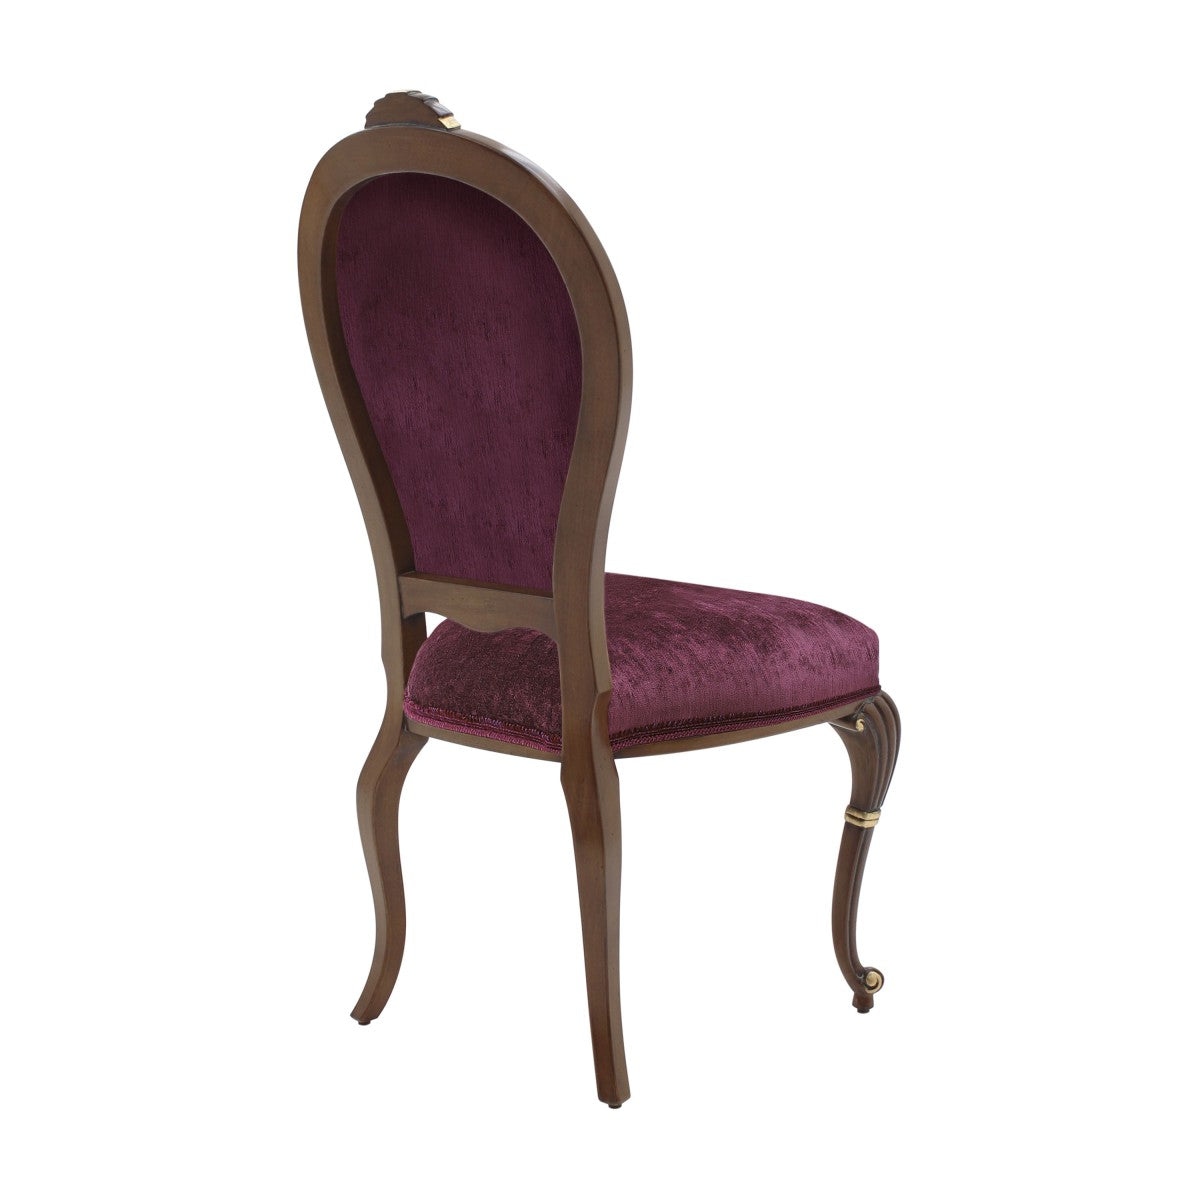 Anna Bespoke Upholstered Classic Carved Dining Chair MS183S Custom Made To Order